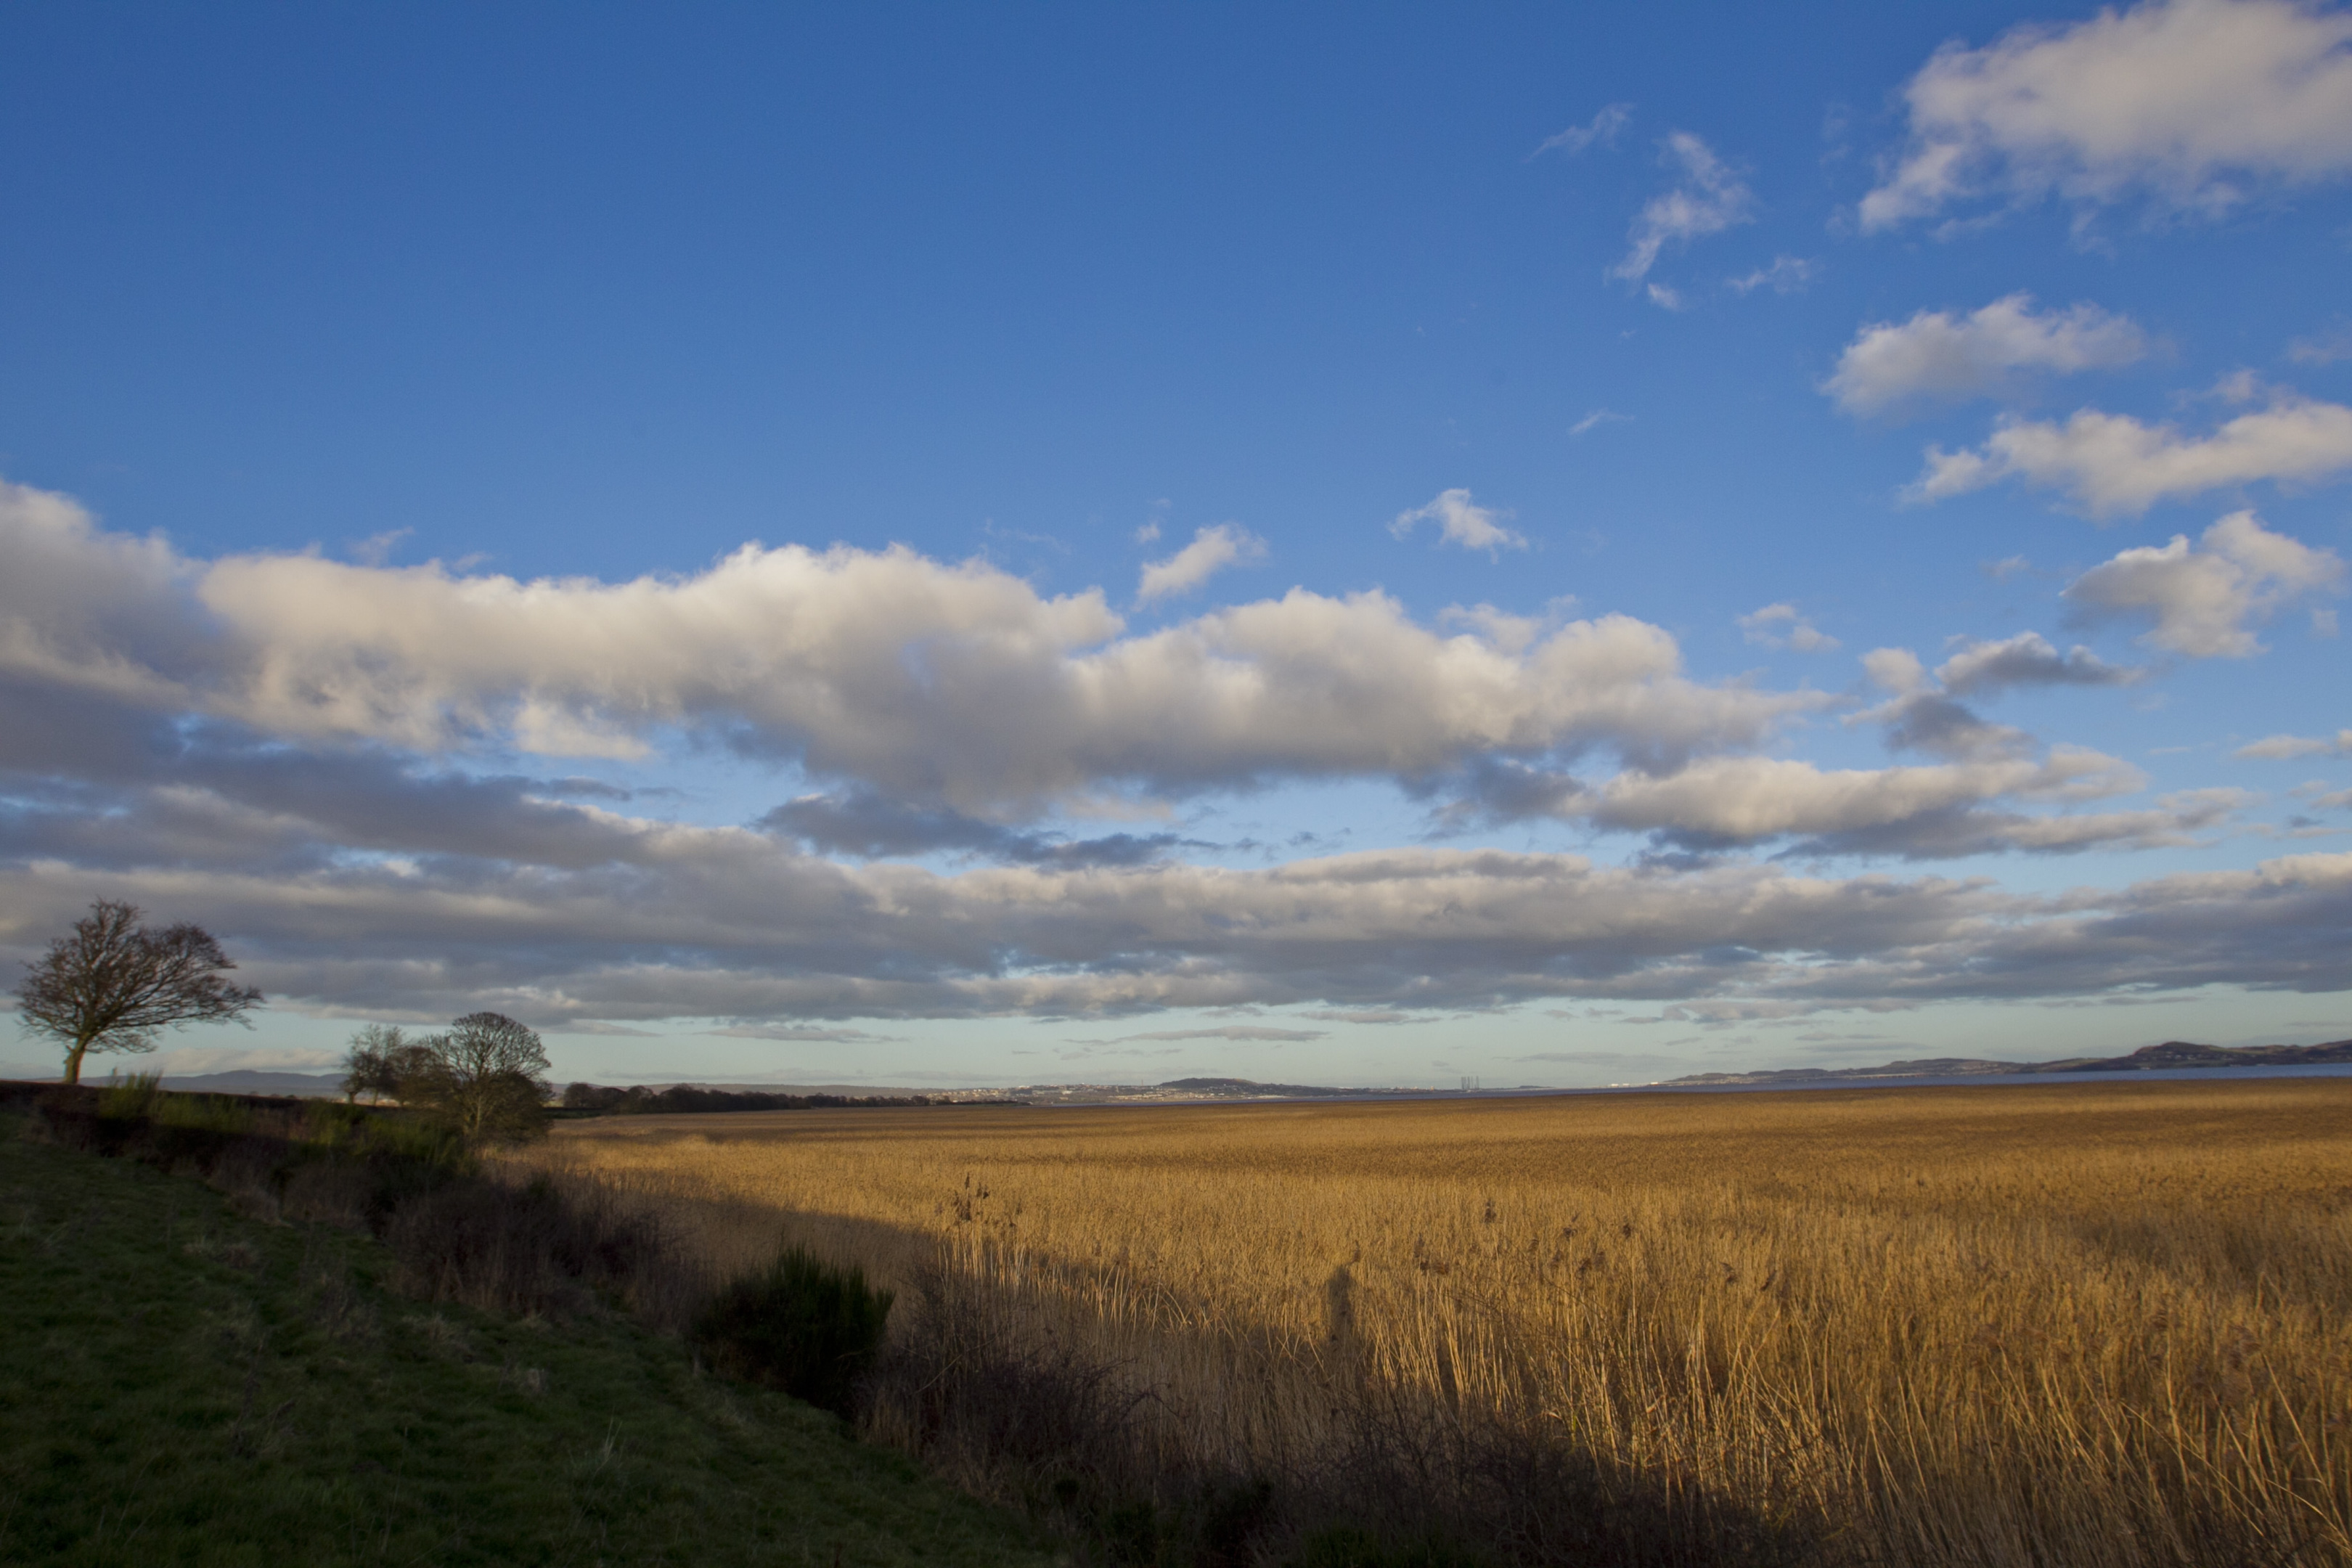 Reed beds on the shore of the River Tay, near Longforgan, looking towards Dundee (Andrew Cawley)